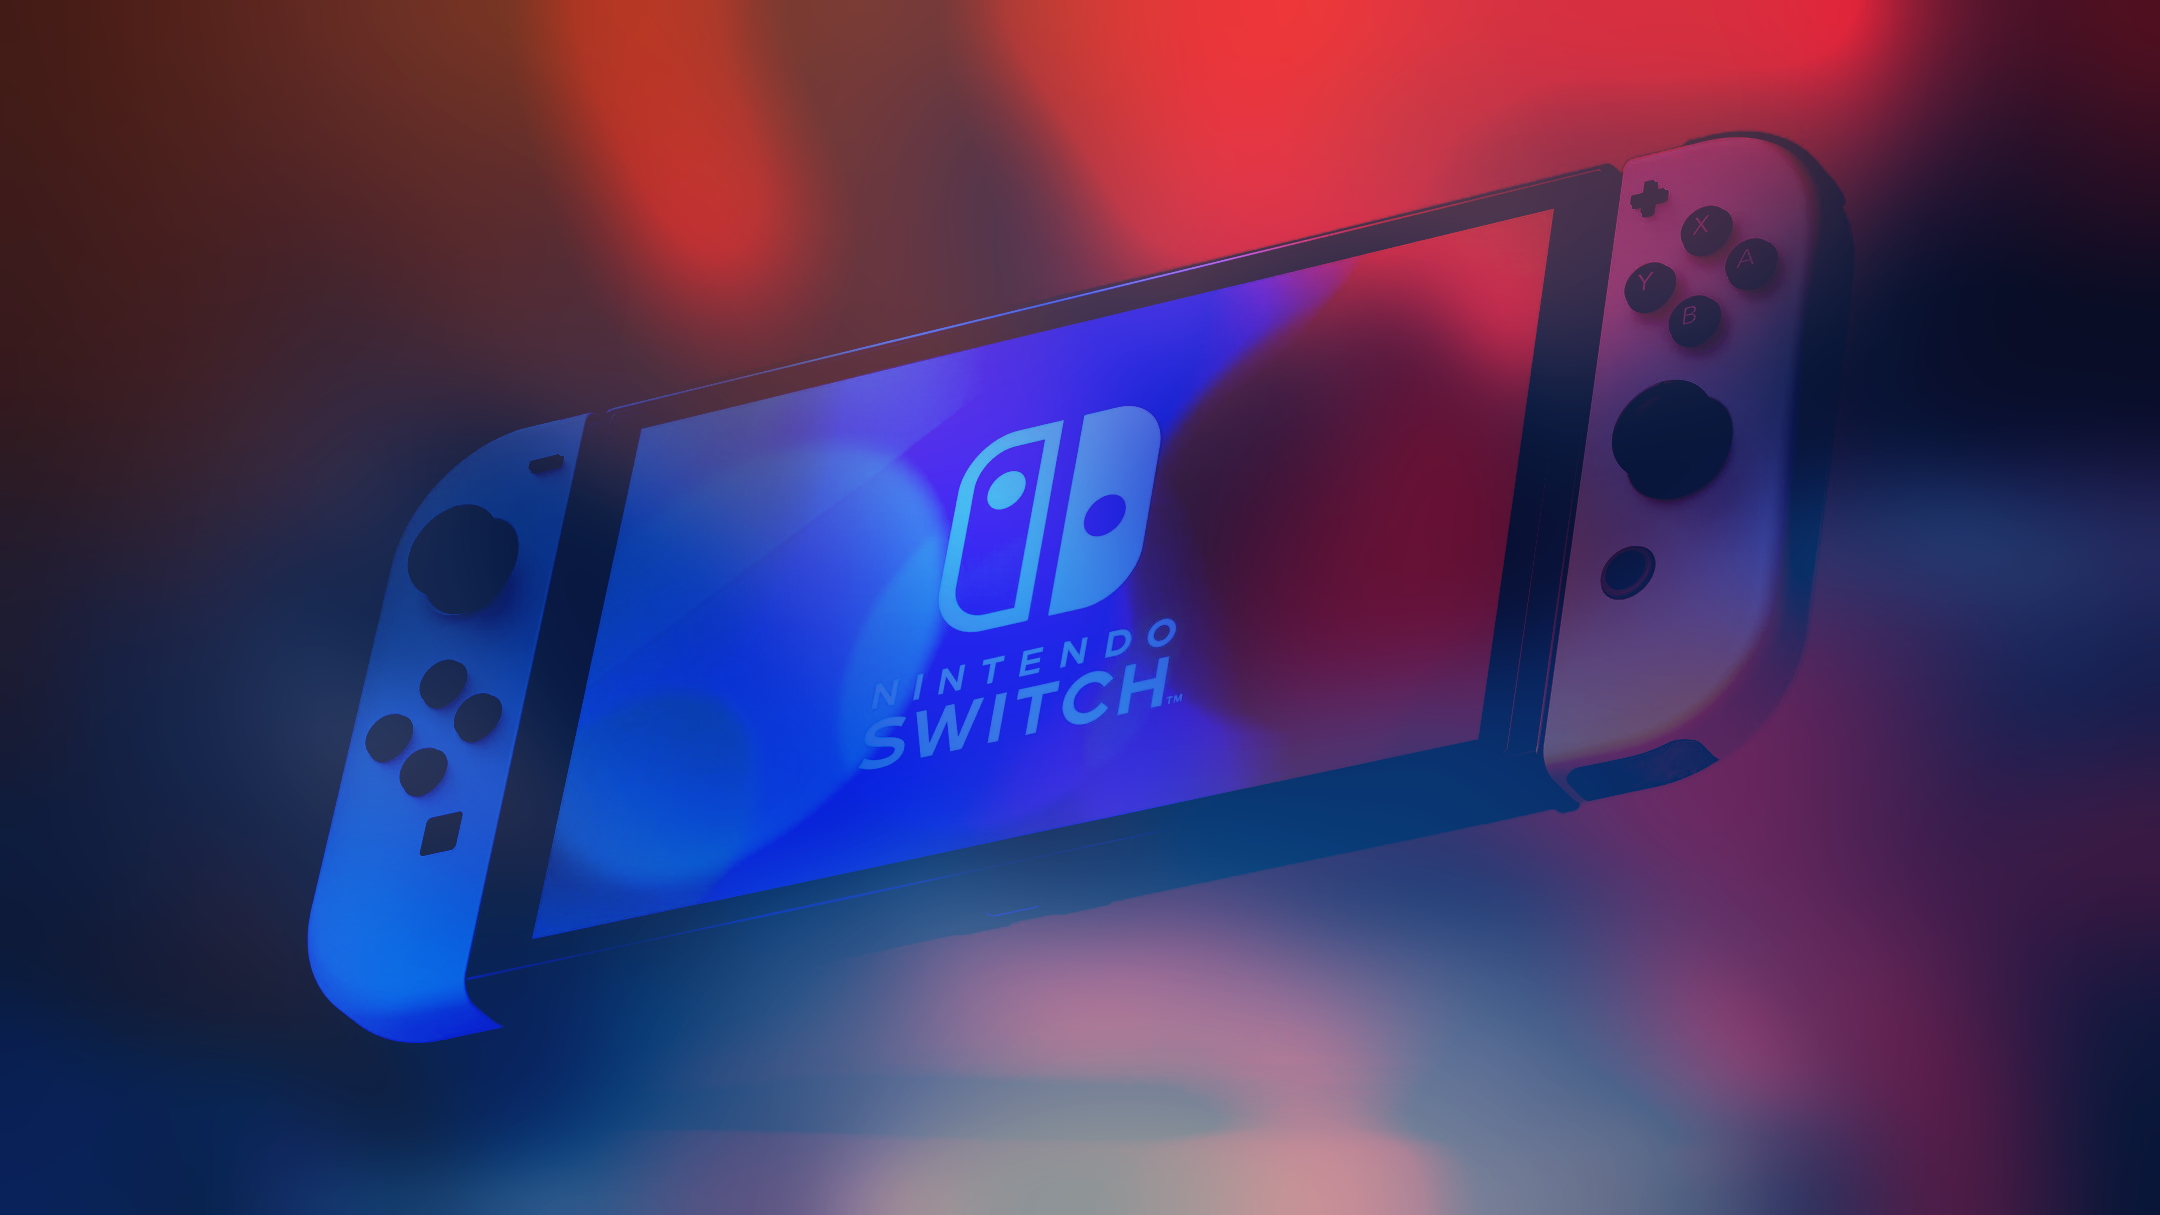 Despite the complaints, Nintendo Switch OLED is a smart strategic move